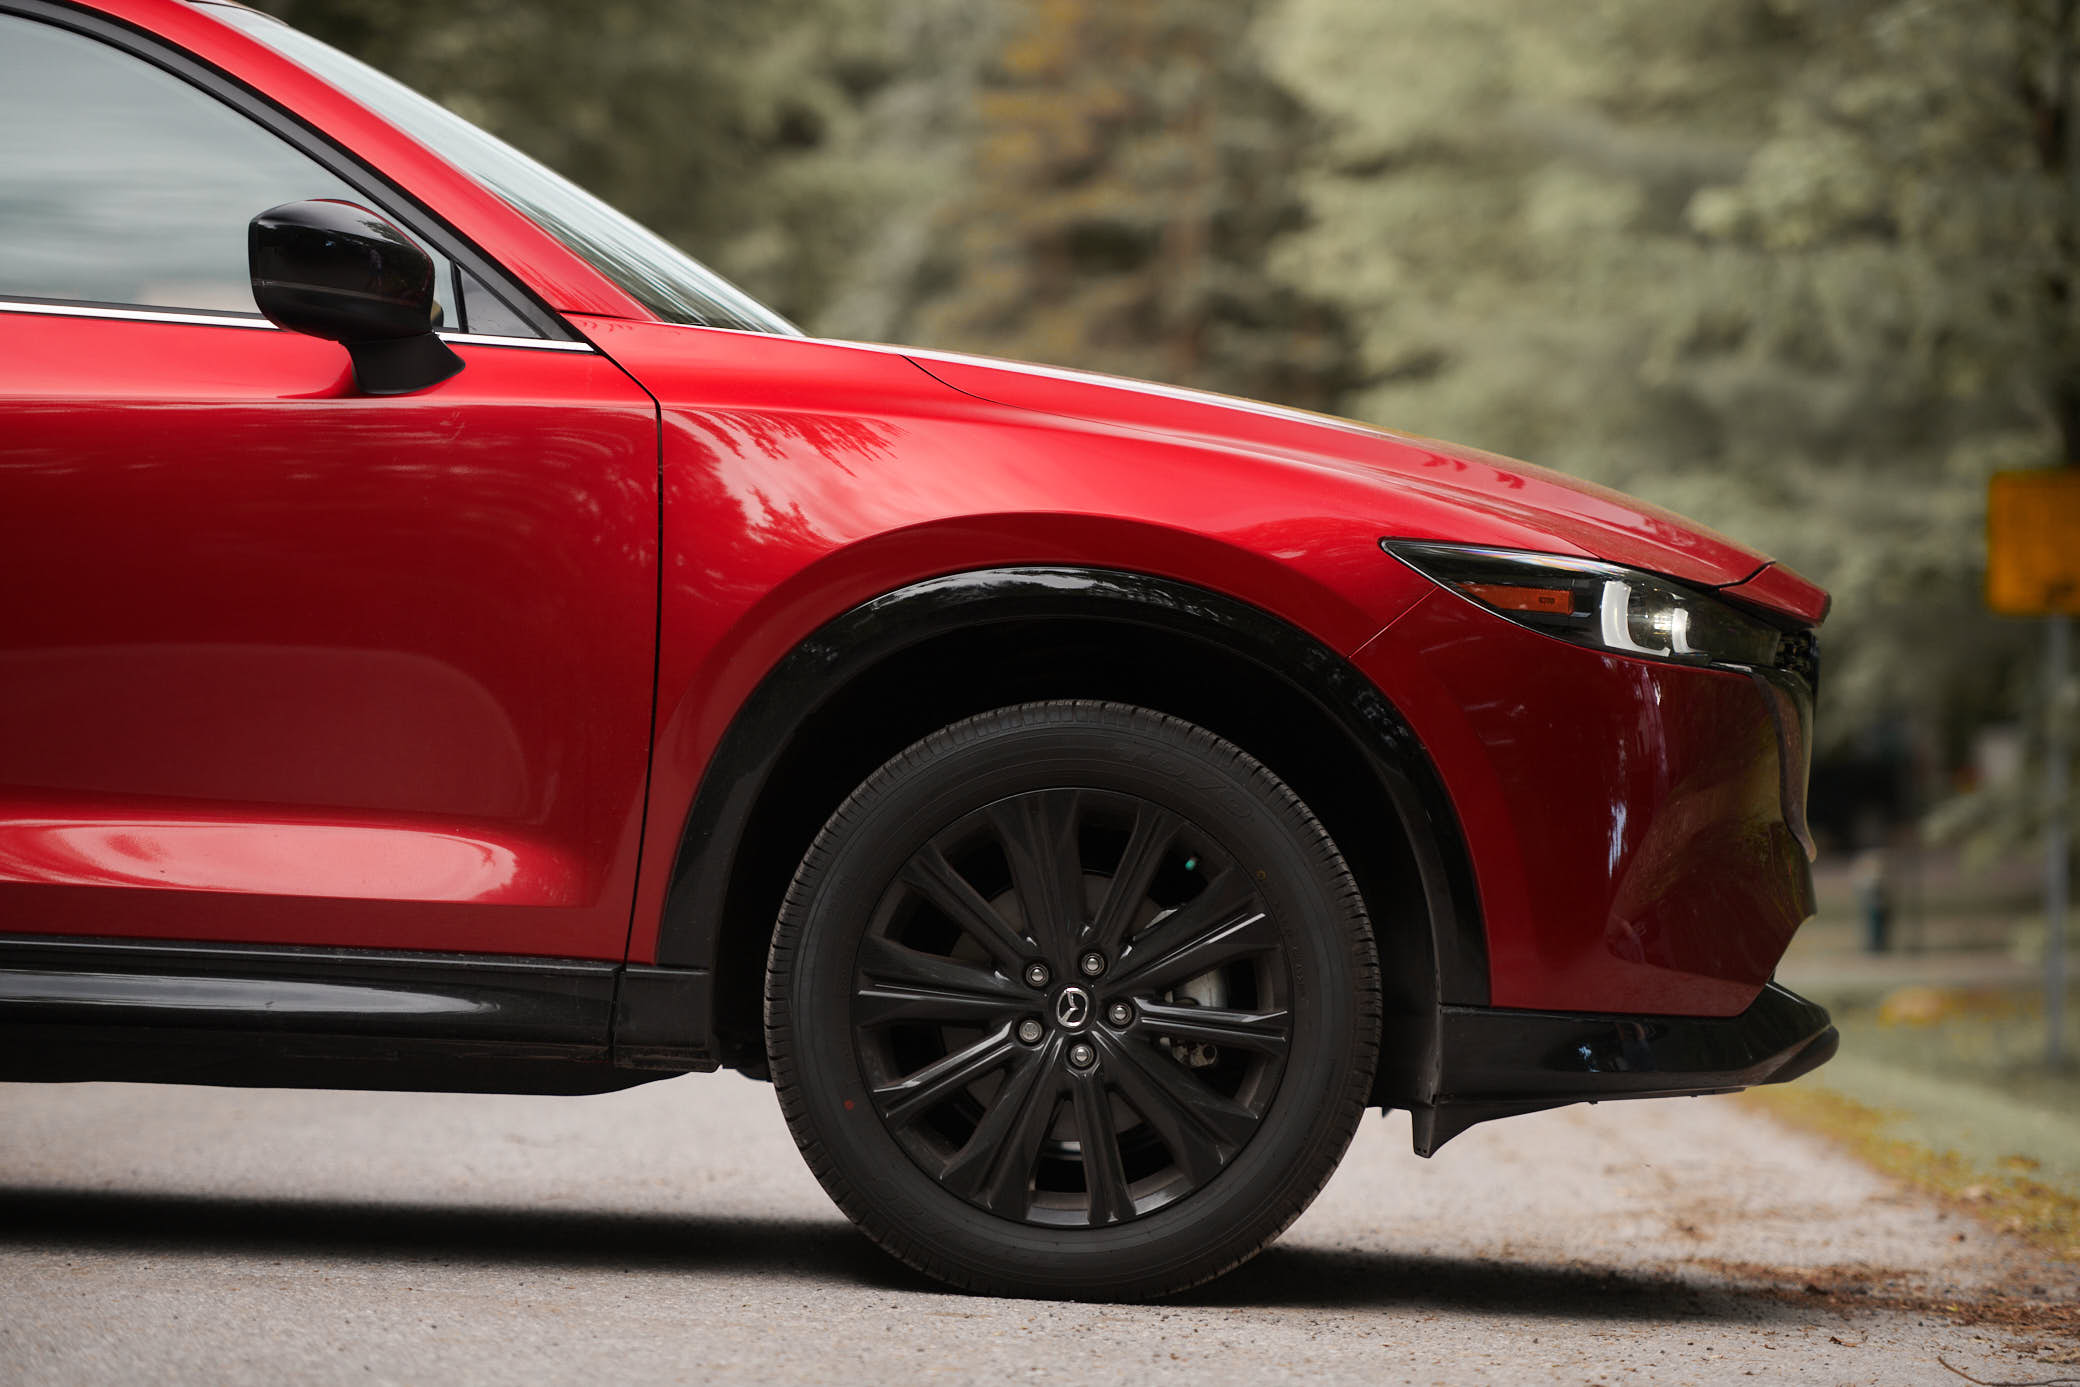 2022 Mazda CX-5 Rendered In High-Res After Grainy Images Emerge